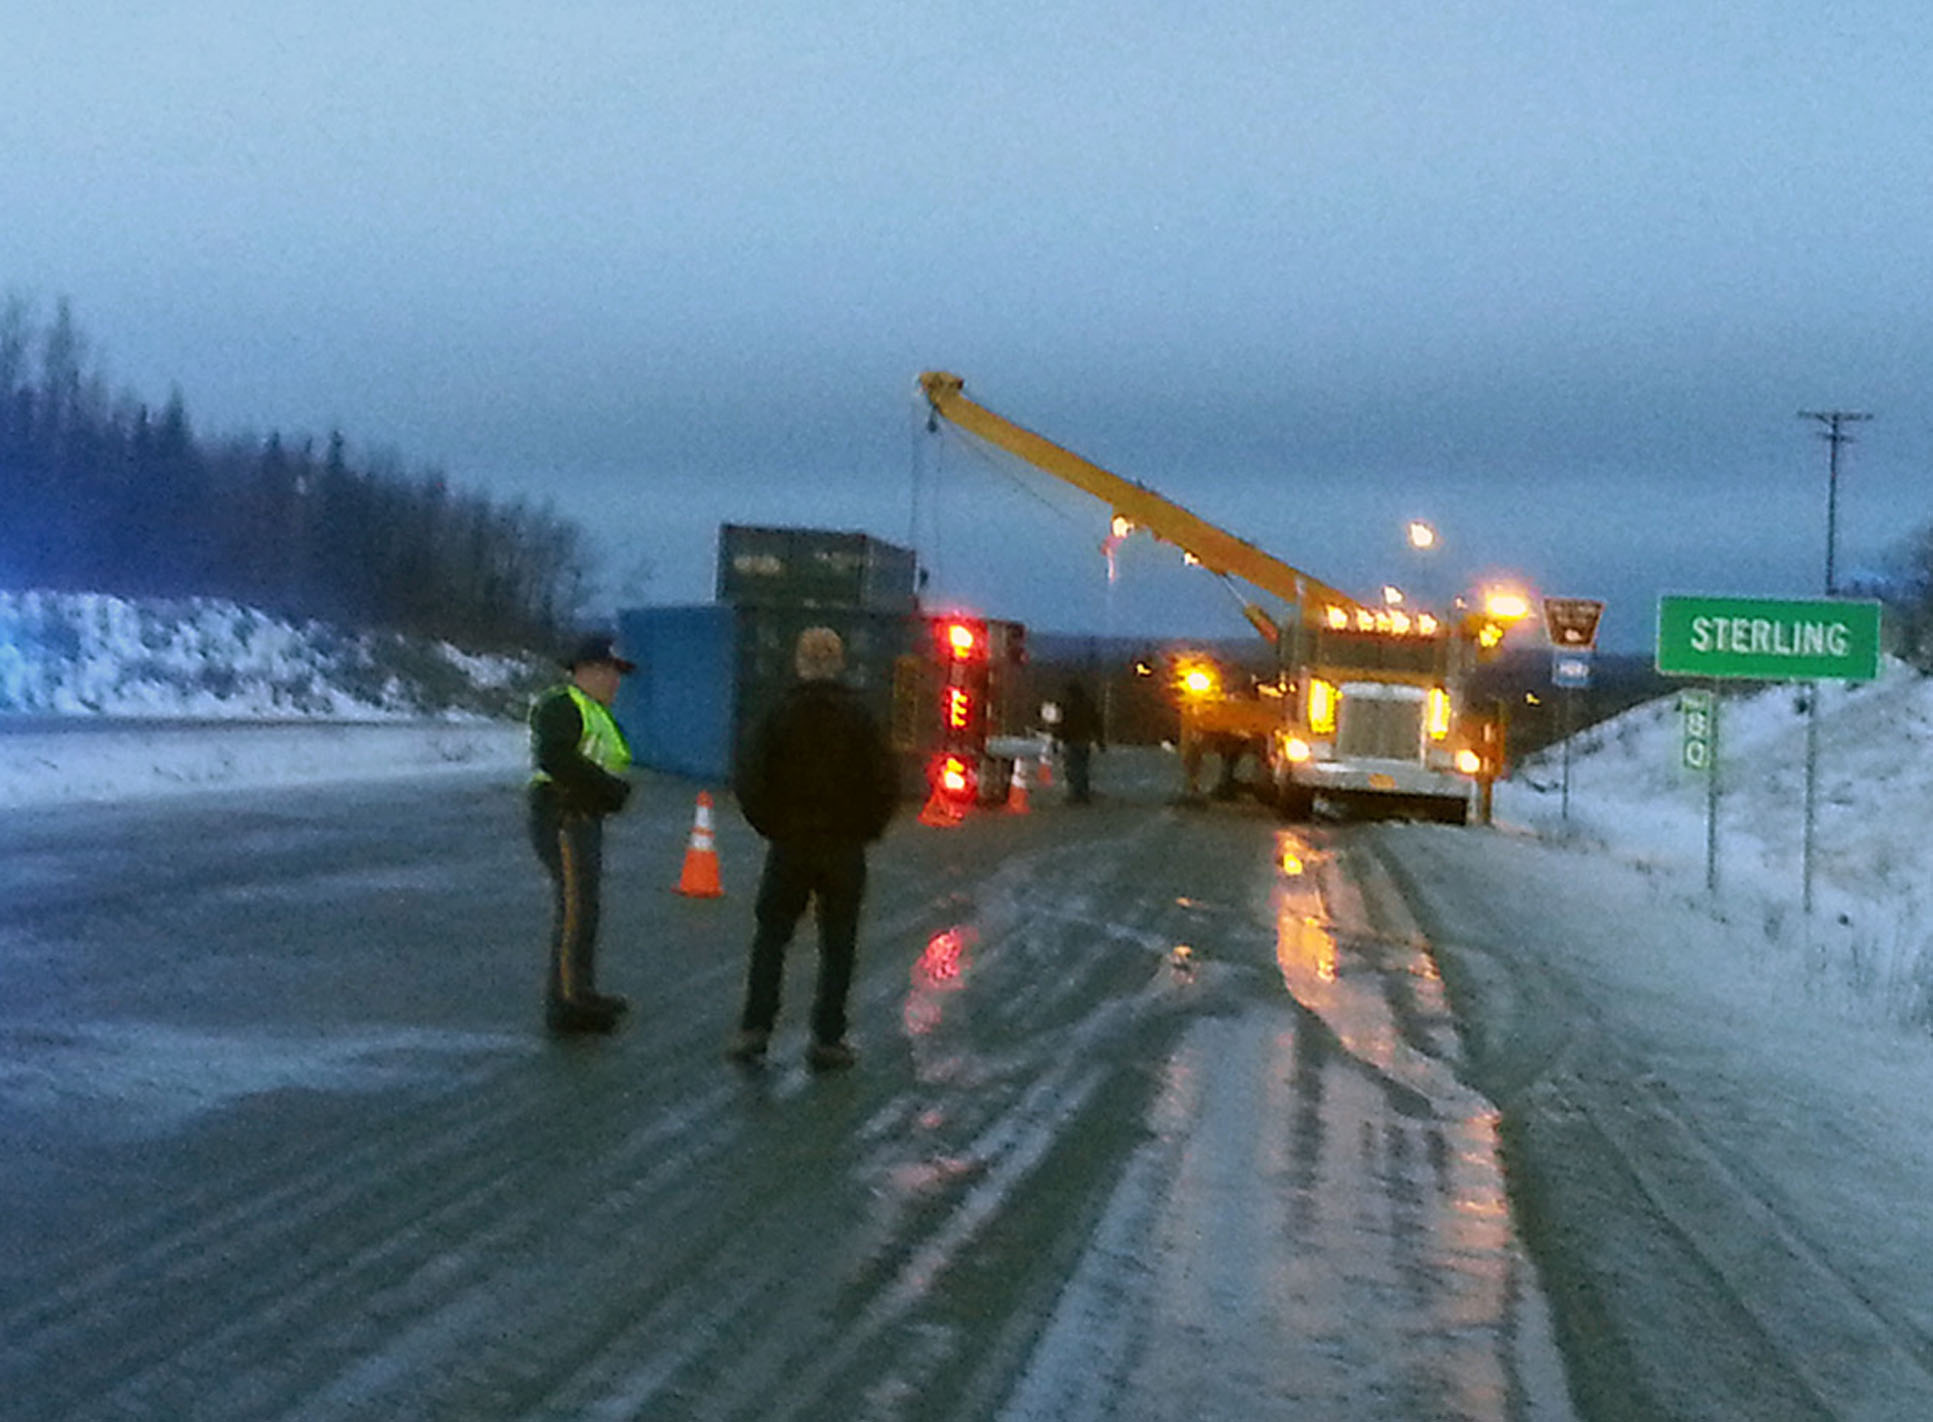 Alaska State Trooper John King talks to a motorist Monday, Dec. 15, 2015 after a truck trailer lost control on the ice and overturned at Mile 80 of the Sterling Highway. The accident occured at 4:45 a.m. Traffic was backed up half a mile for nearly an hour while a tow truck with a crane attempted to put the trailer upright. The scene was cleared by 11 a.m. The National Weather Service calls for freezing rain for Tuesday morning.